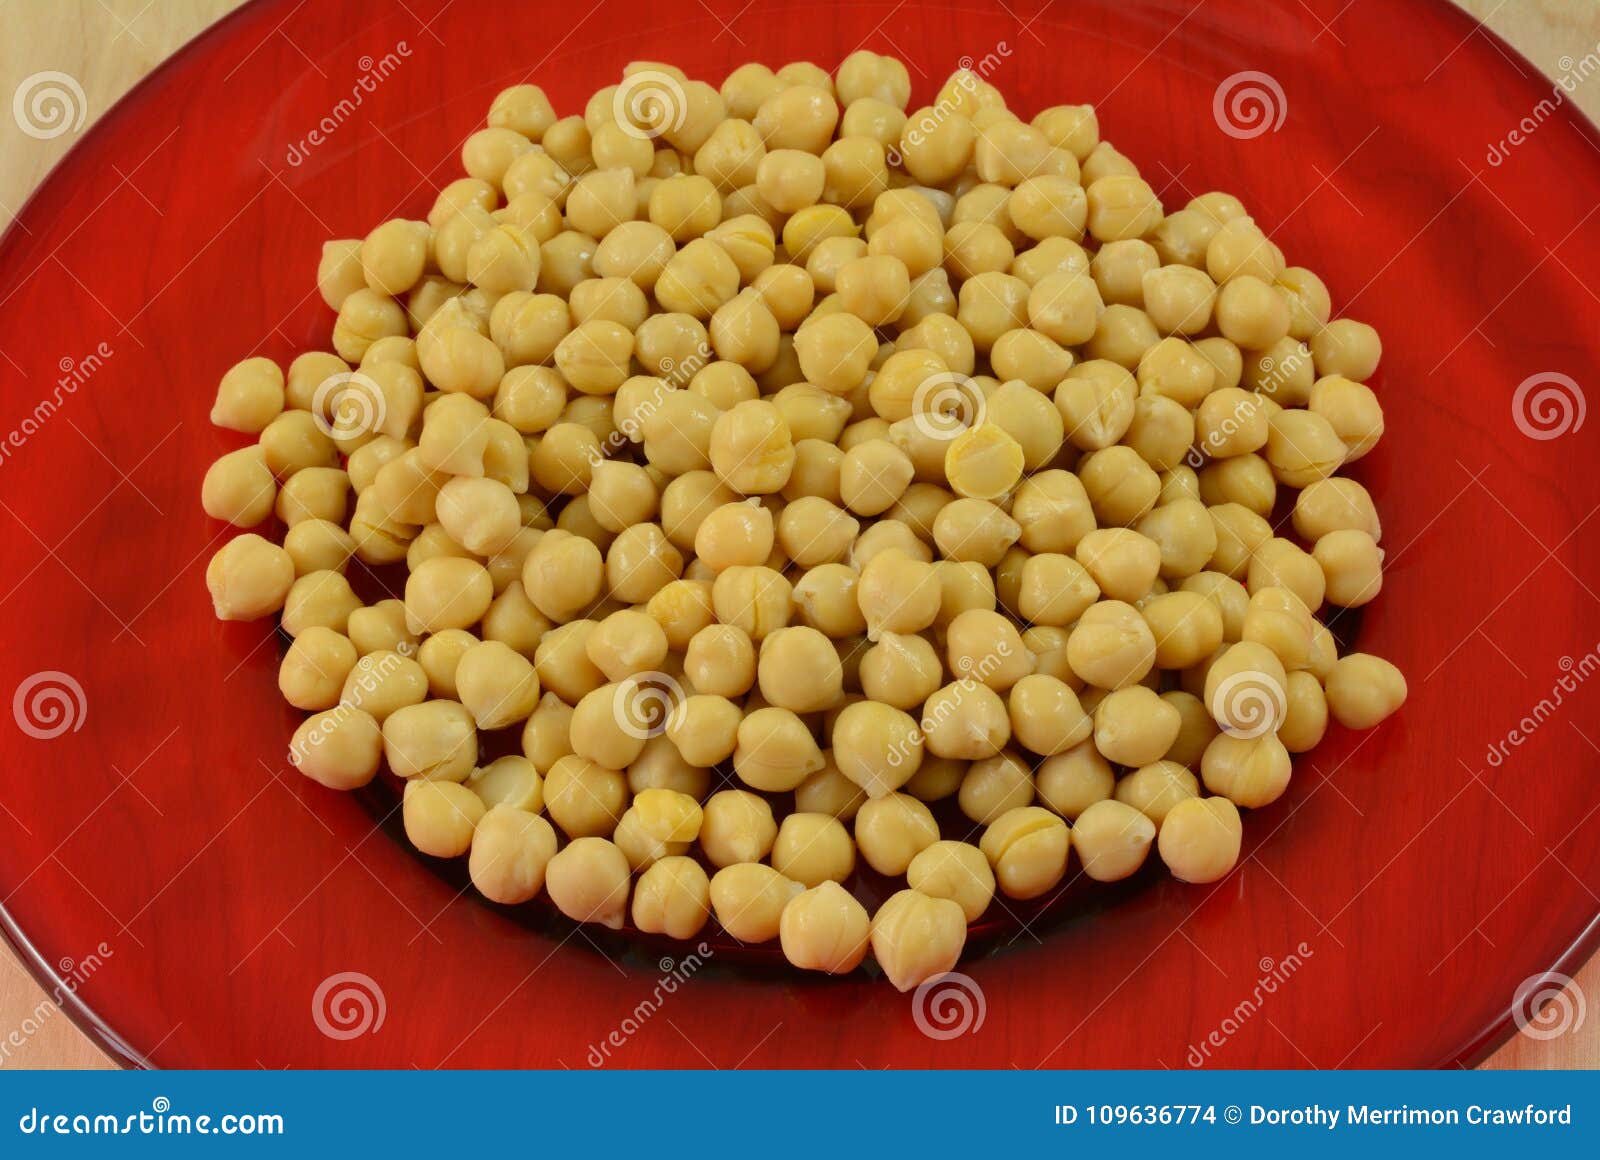 Canned Garbanzo Beans Or Chickpeas Stock Photo - Image of natural ...